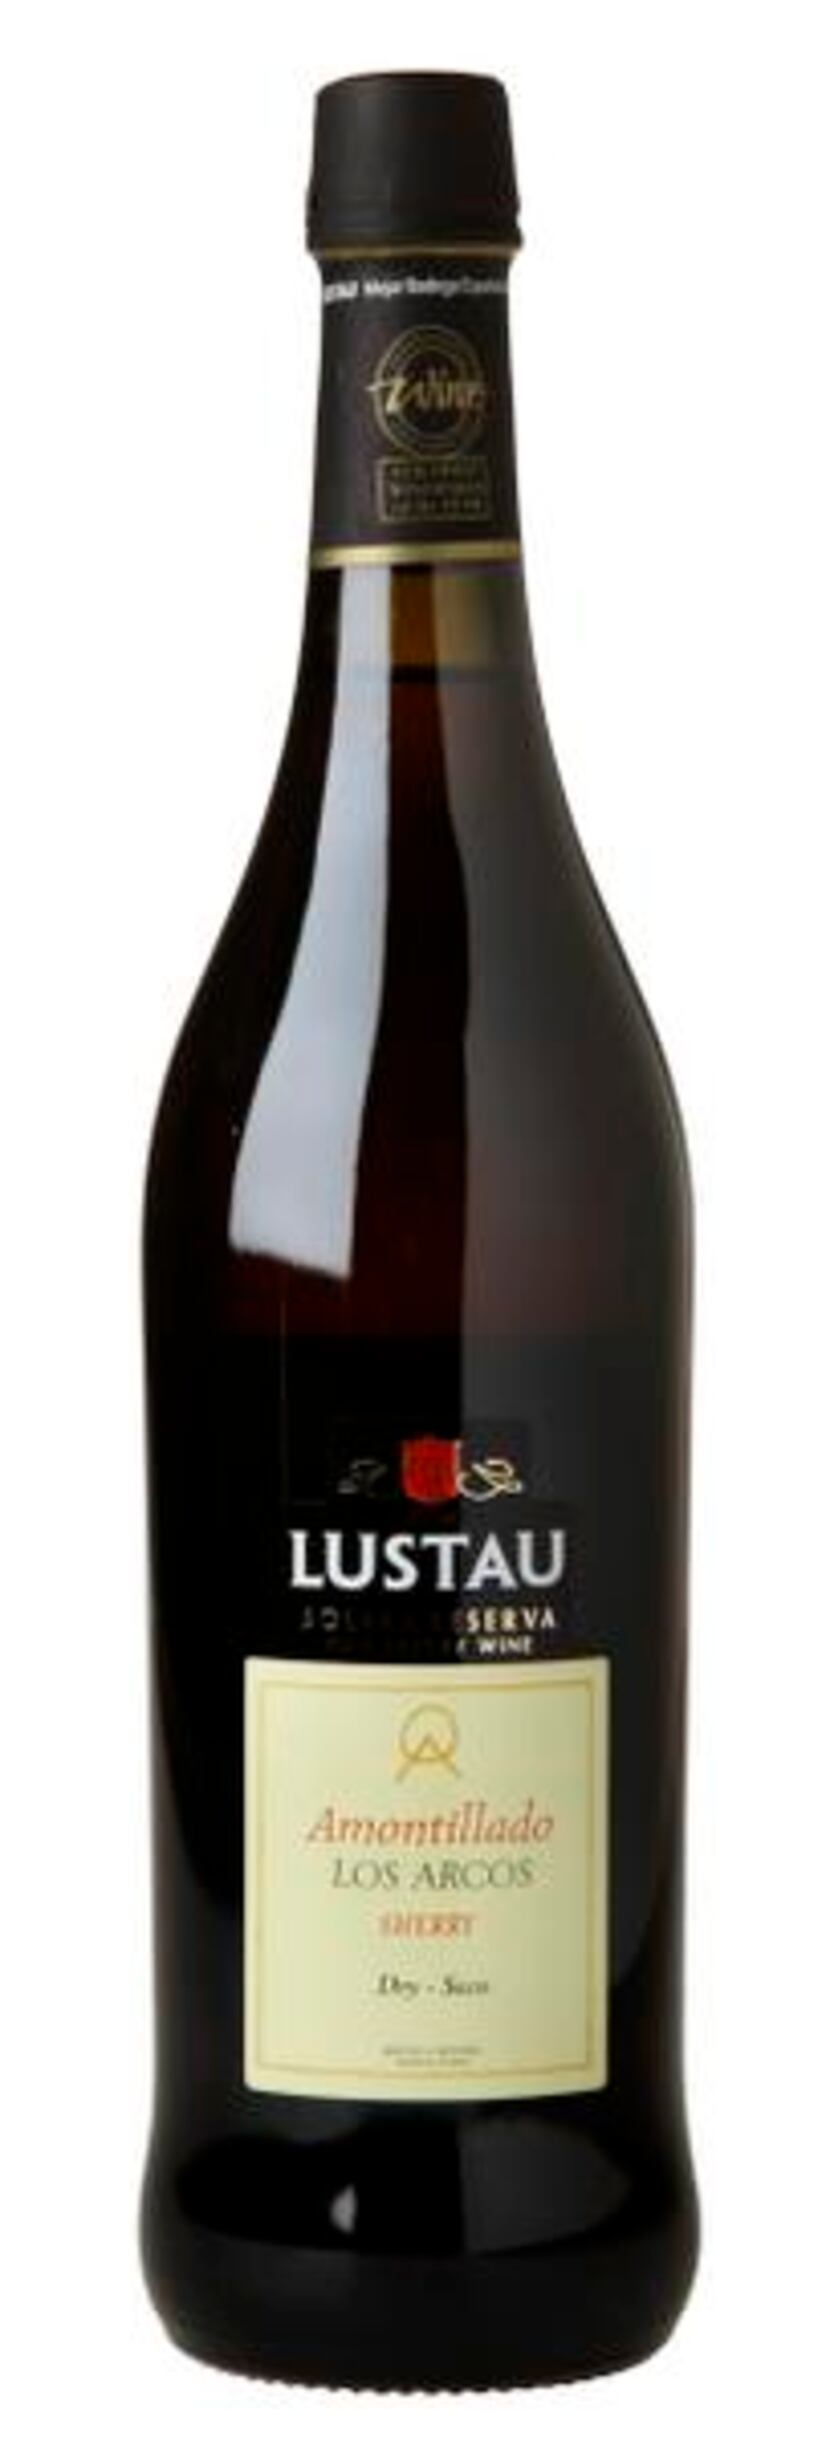 
Lustau "Los Arcos" Dry Amontillado Sherry. Because sherry is a blend of consecutive...